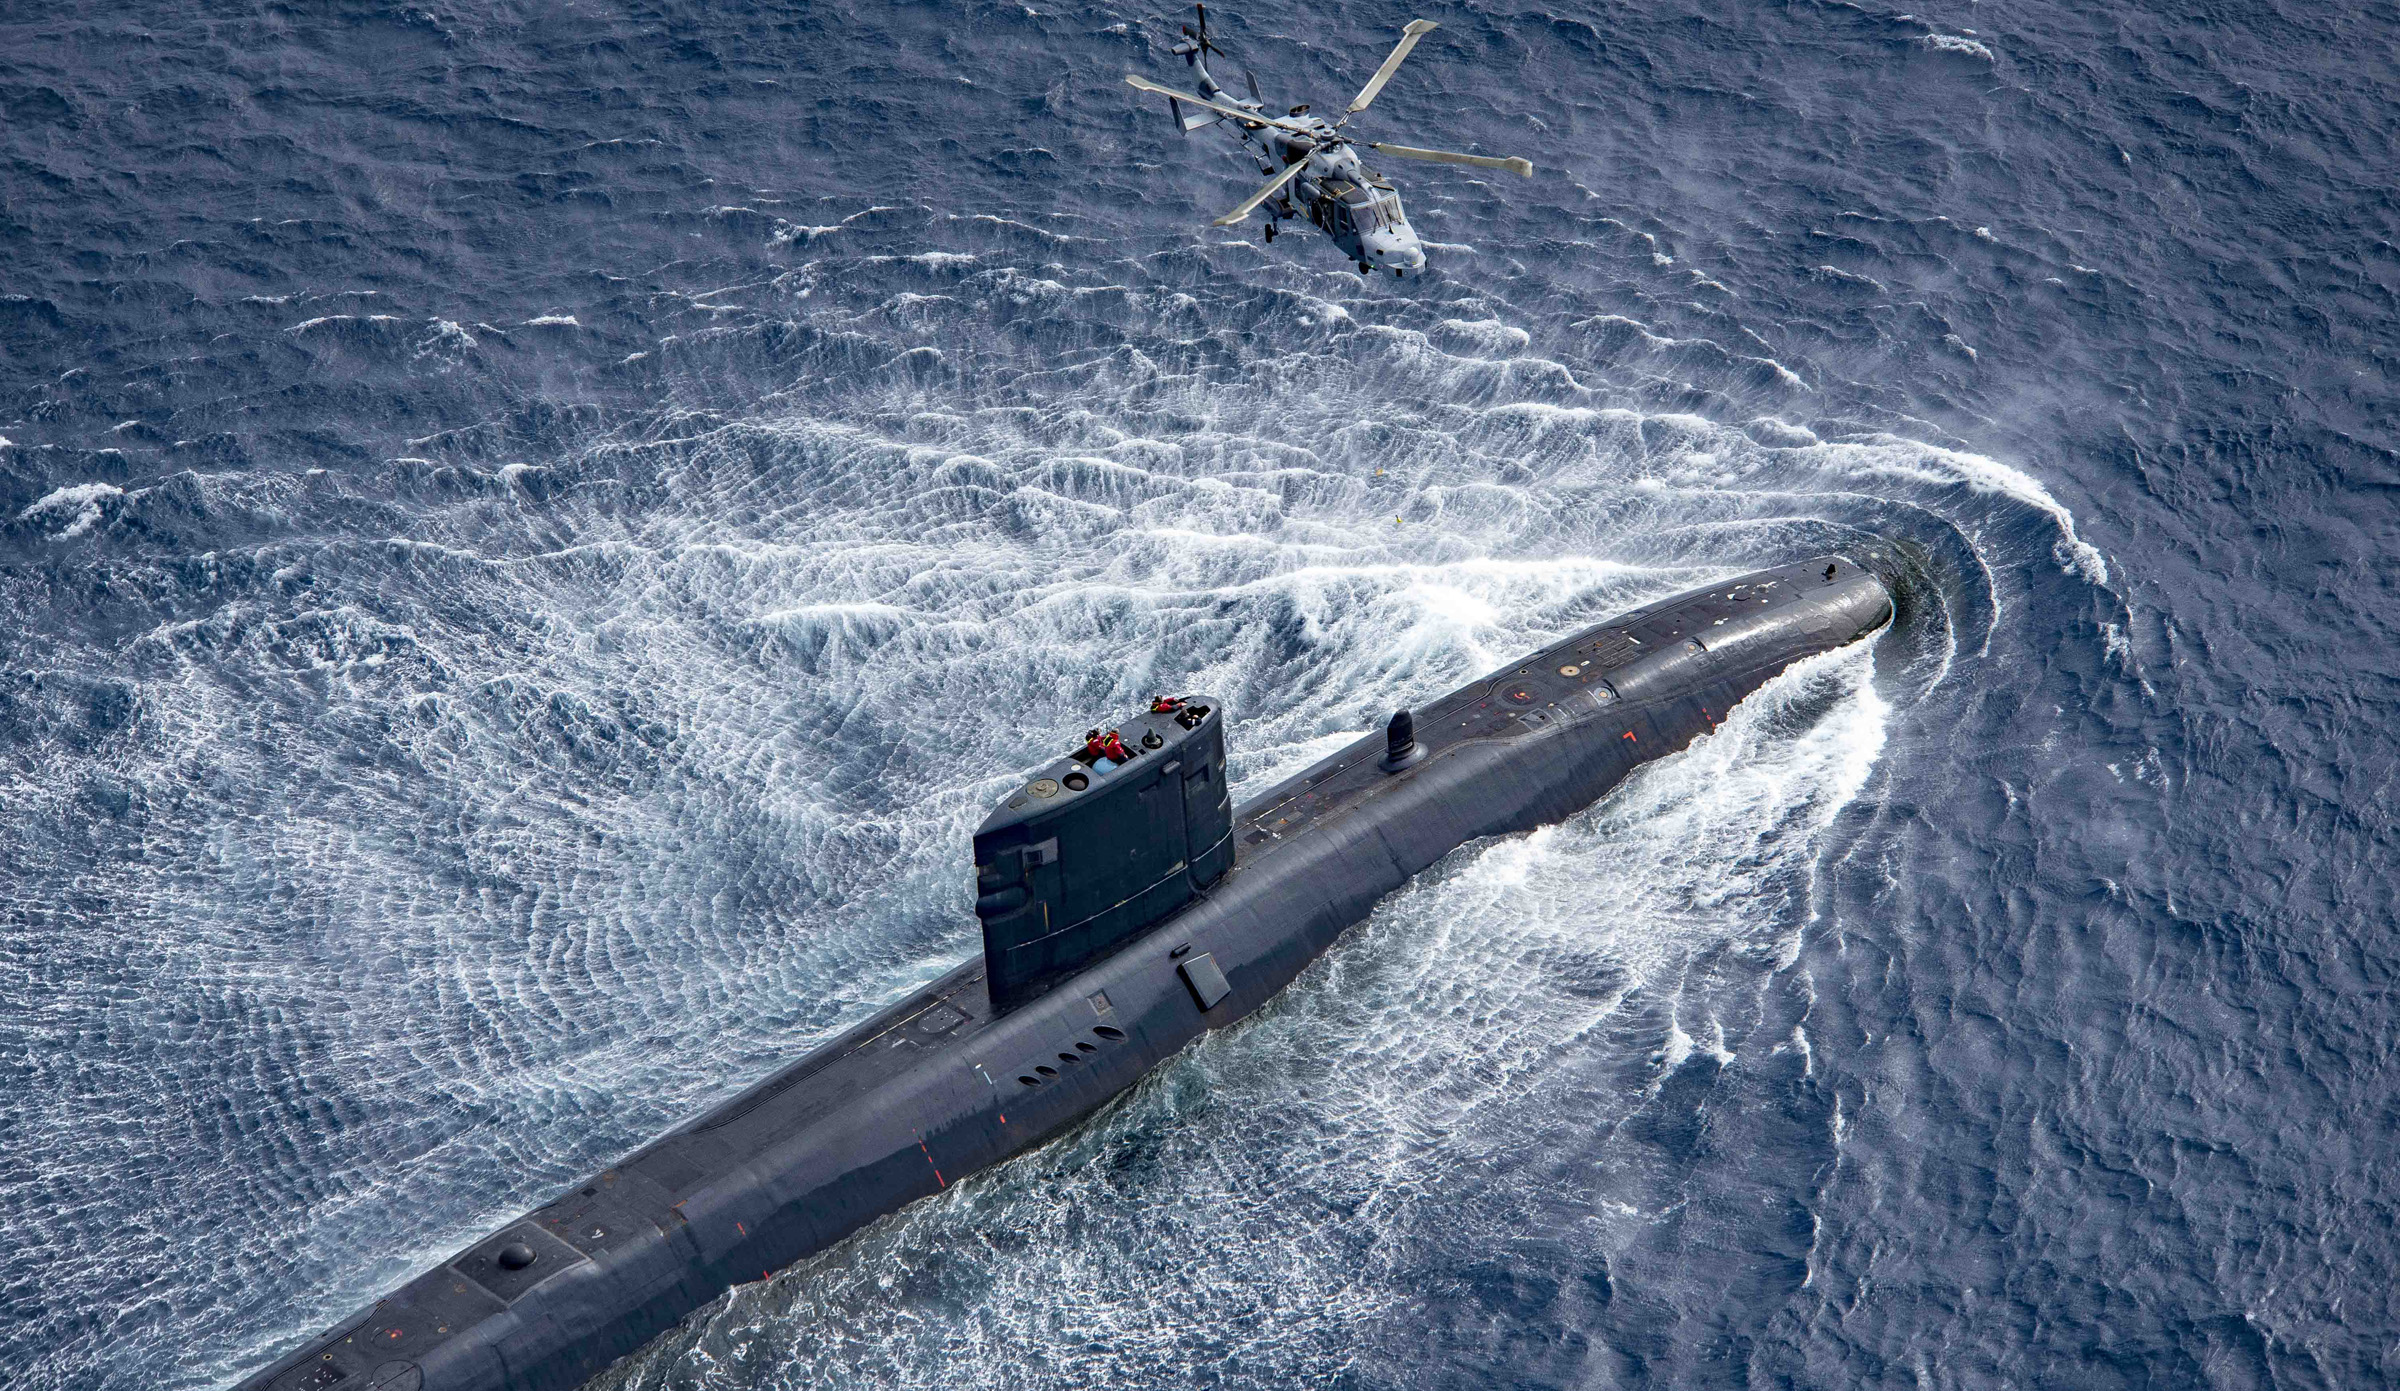 A British nuclear-powered attack submarine, pictured in the North Atlantic during 2017. Photo: USN